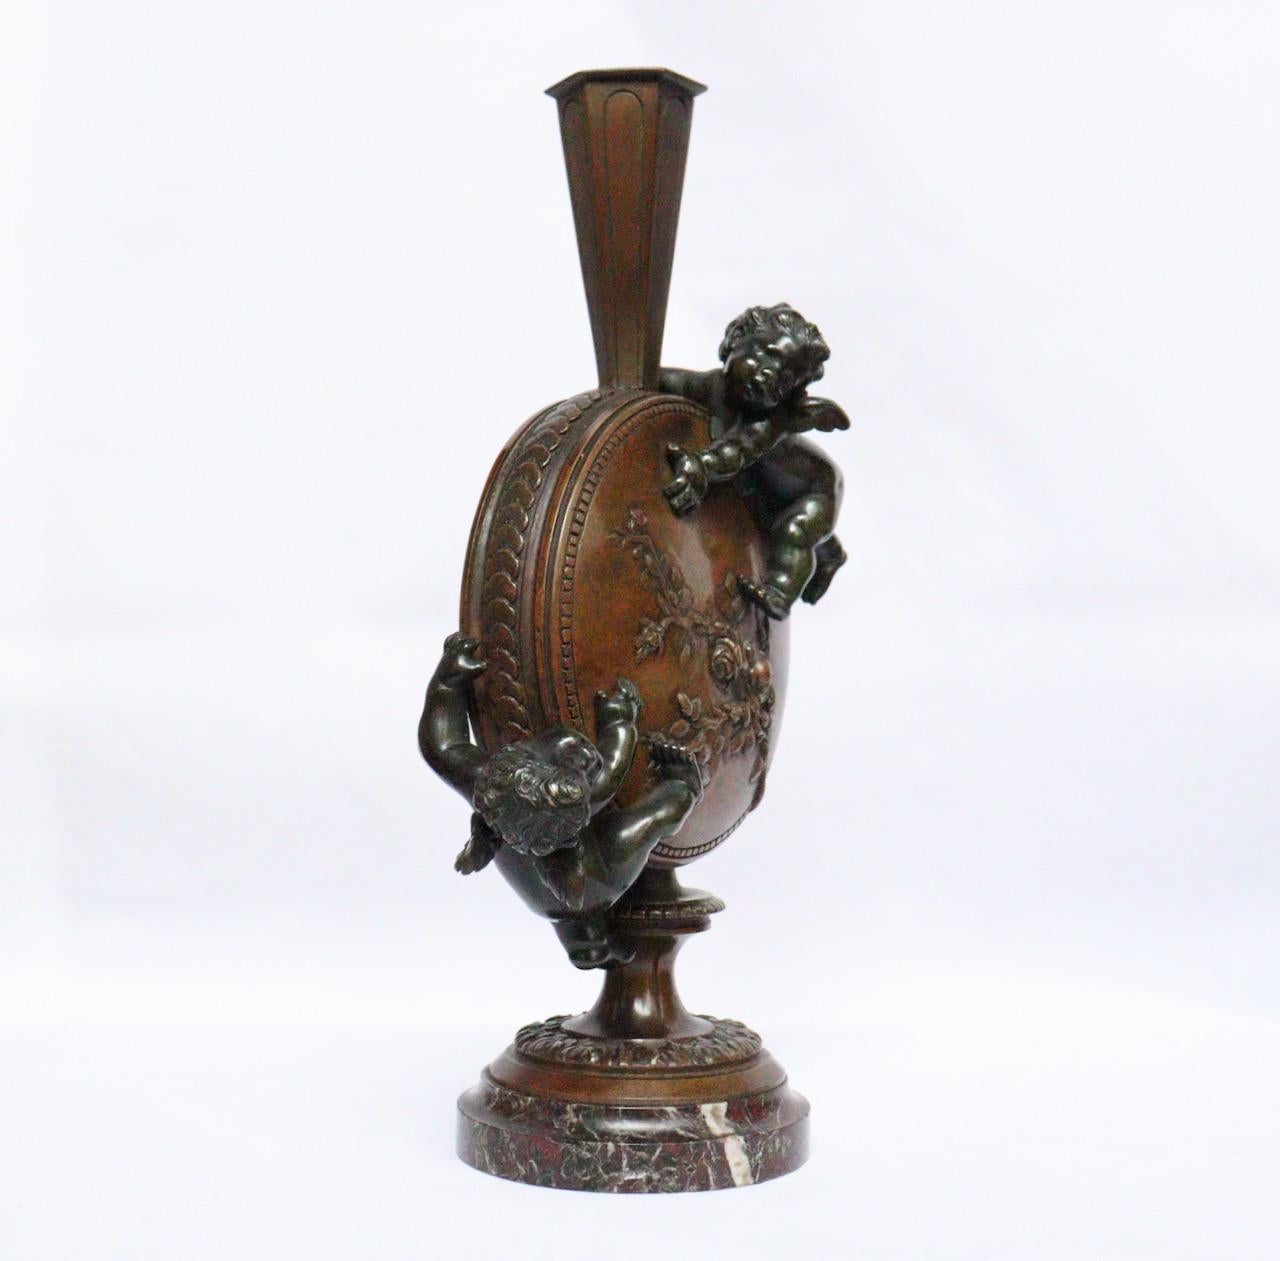 Patinated French Napoléon III Bronze Putti Vase by Auguste Moreau